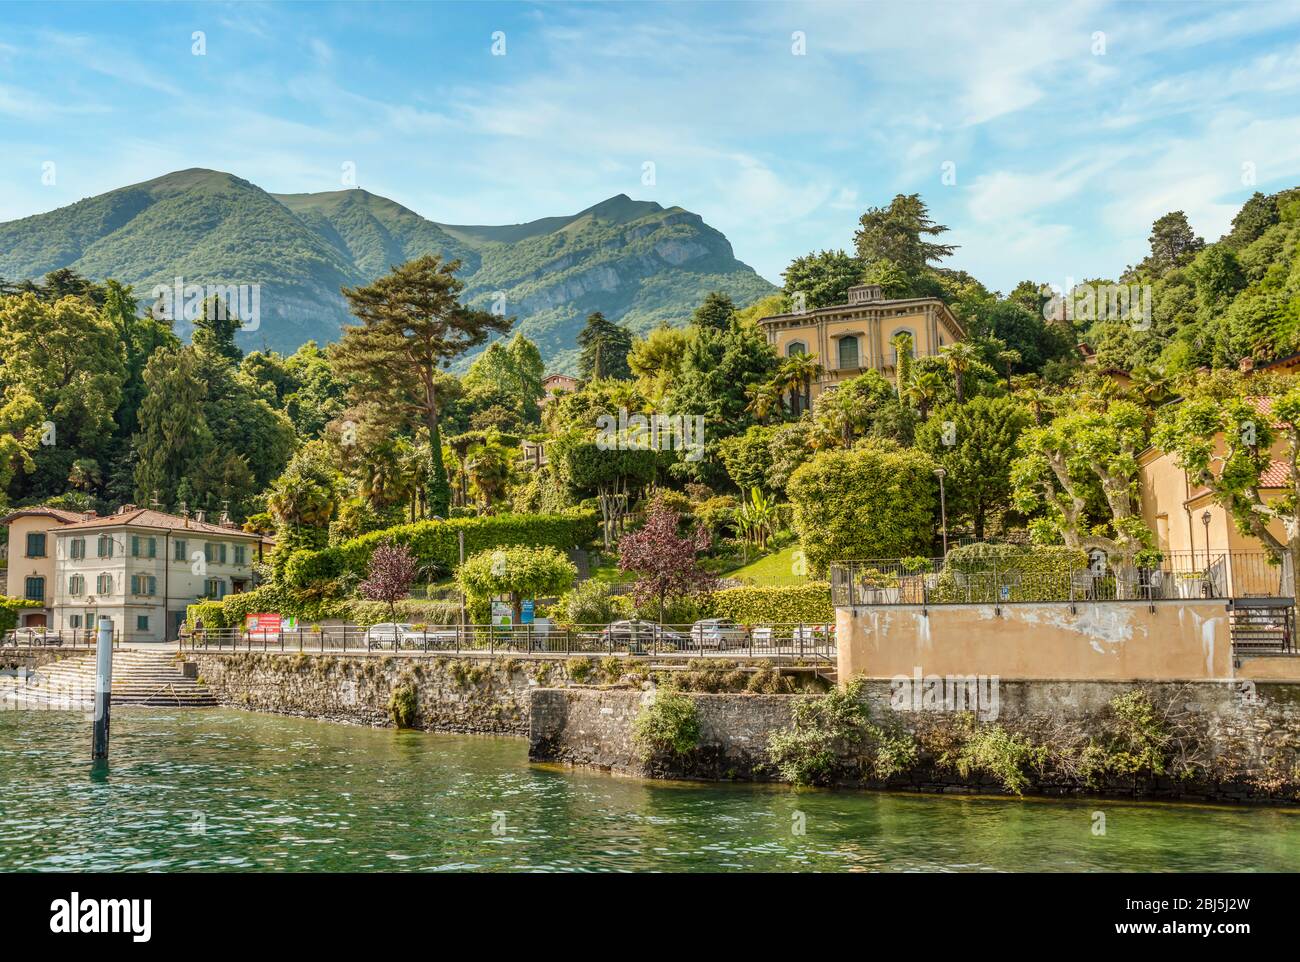 Waterfront of Tremezzo at Lake Como seen from the lakeside, Lombardy, Italy Stock Photo